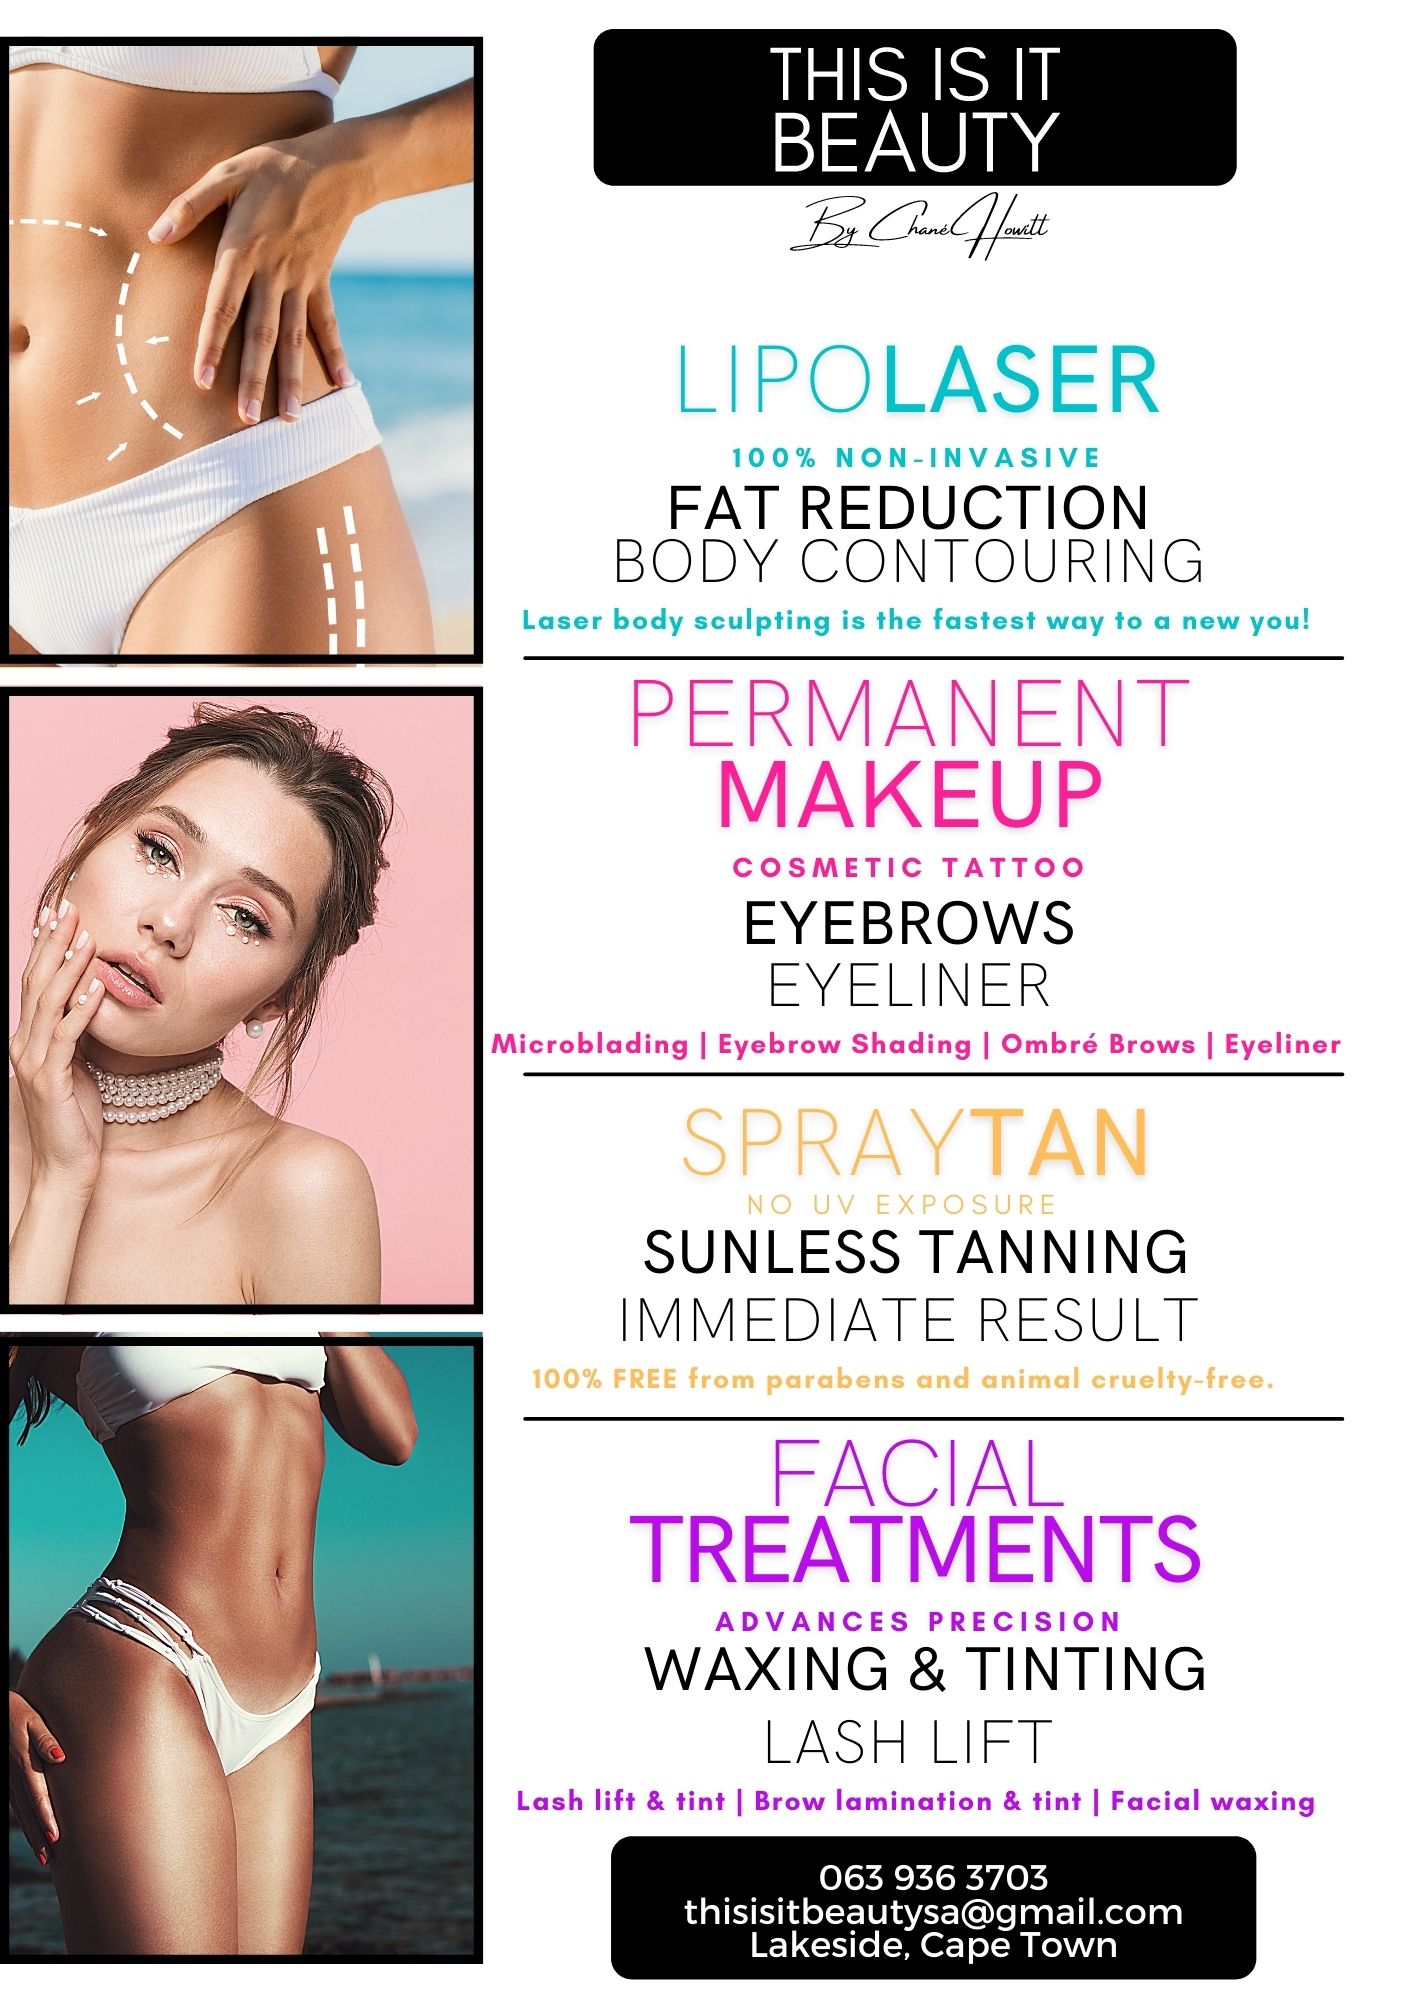 This Is It Beauty - By Chané Howitt Specialize in Lipo Laser, Permanent Makeup, Spray Tanning, Waxing, Tinting, Lash Lift/Curl, Brow Lamination and Anti Wrinkle Ultrasound treatments. Based in Lakeside, Cape Town, South Africa